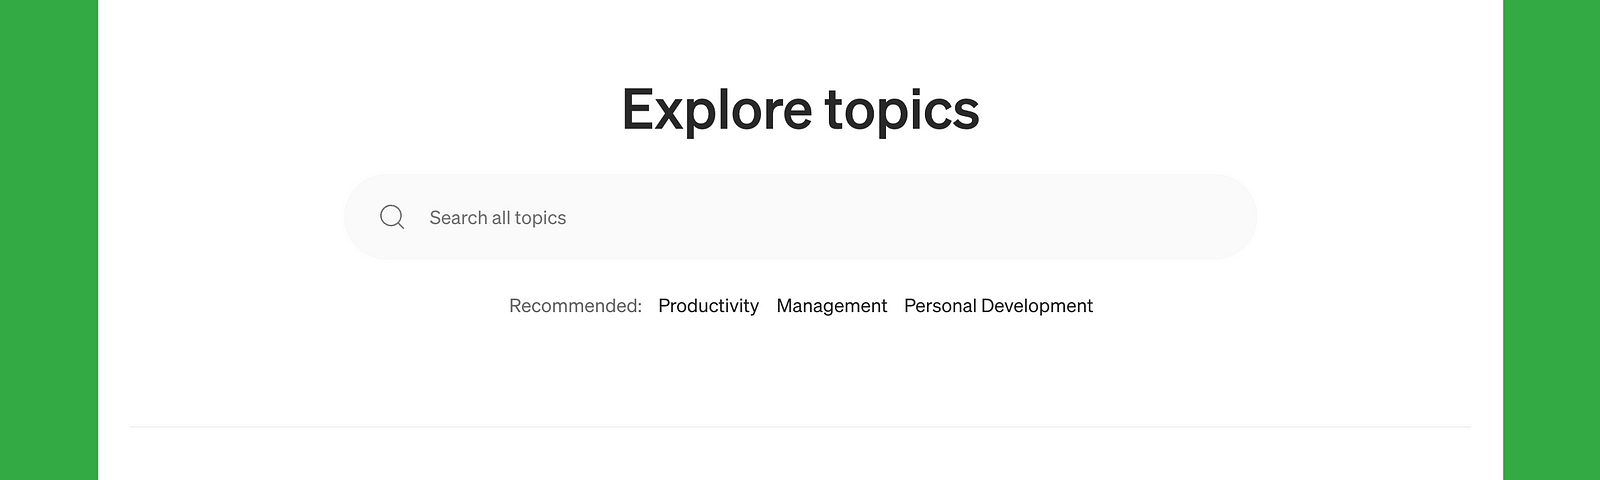 Screenshot of “Explore Topics” page with Explore Topics header, a search bar, and a list of topics.